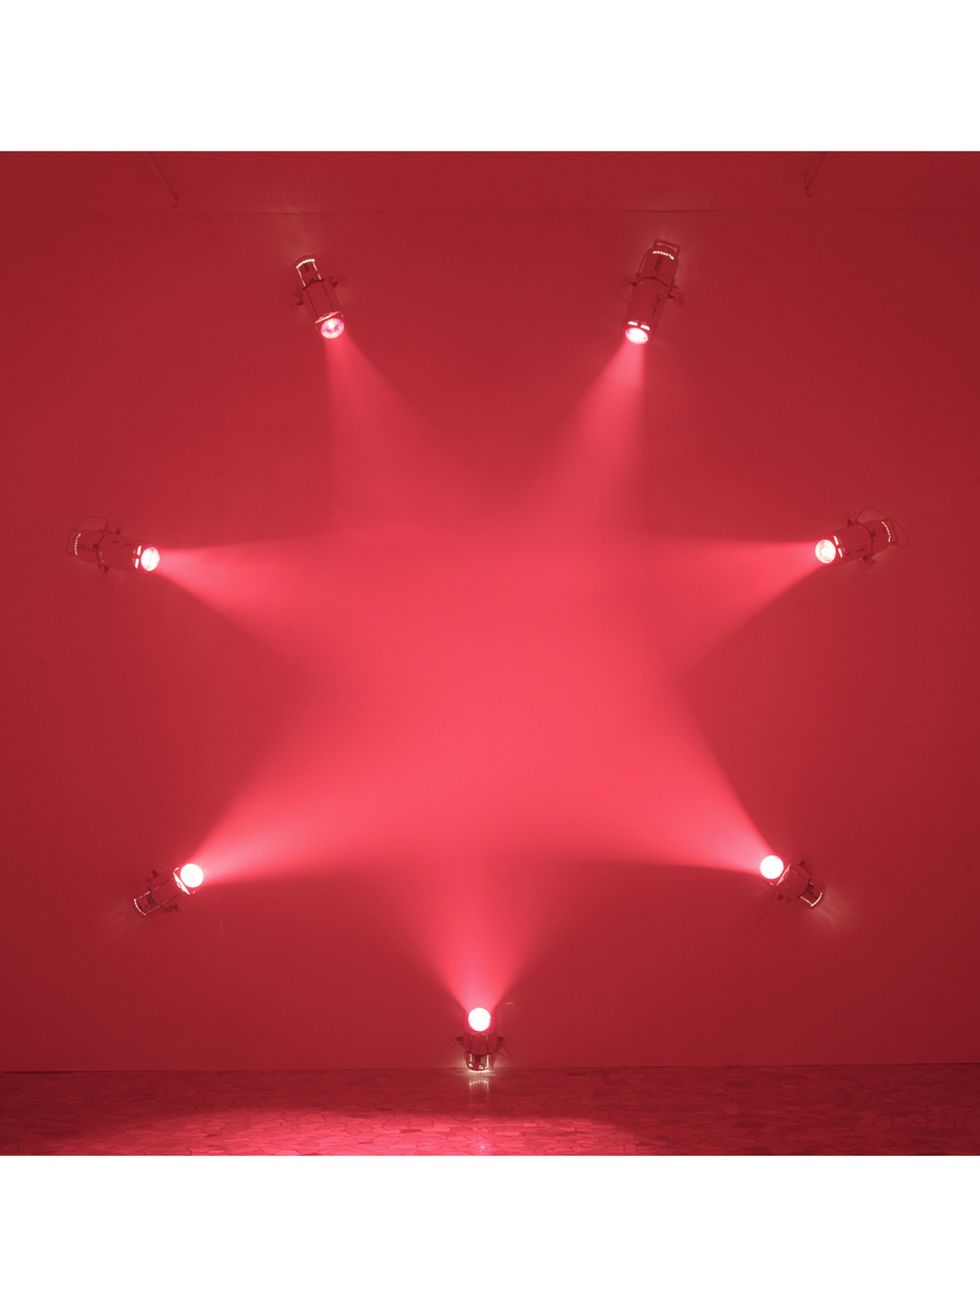 <p><a href="http://ticketing.southbankcentre.co.uk/whatson/light-show-69759"> - Hayward Gallery, London</a></p><p>30 January - 28 April</p><p>The exhibition brings together a collection of sculptures and installations that use light to sculpt and shape sp